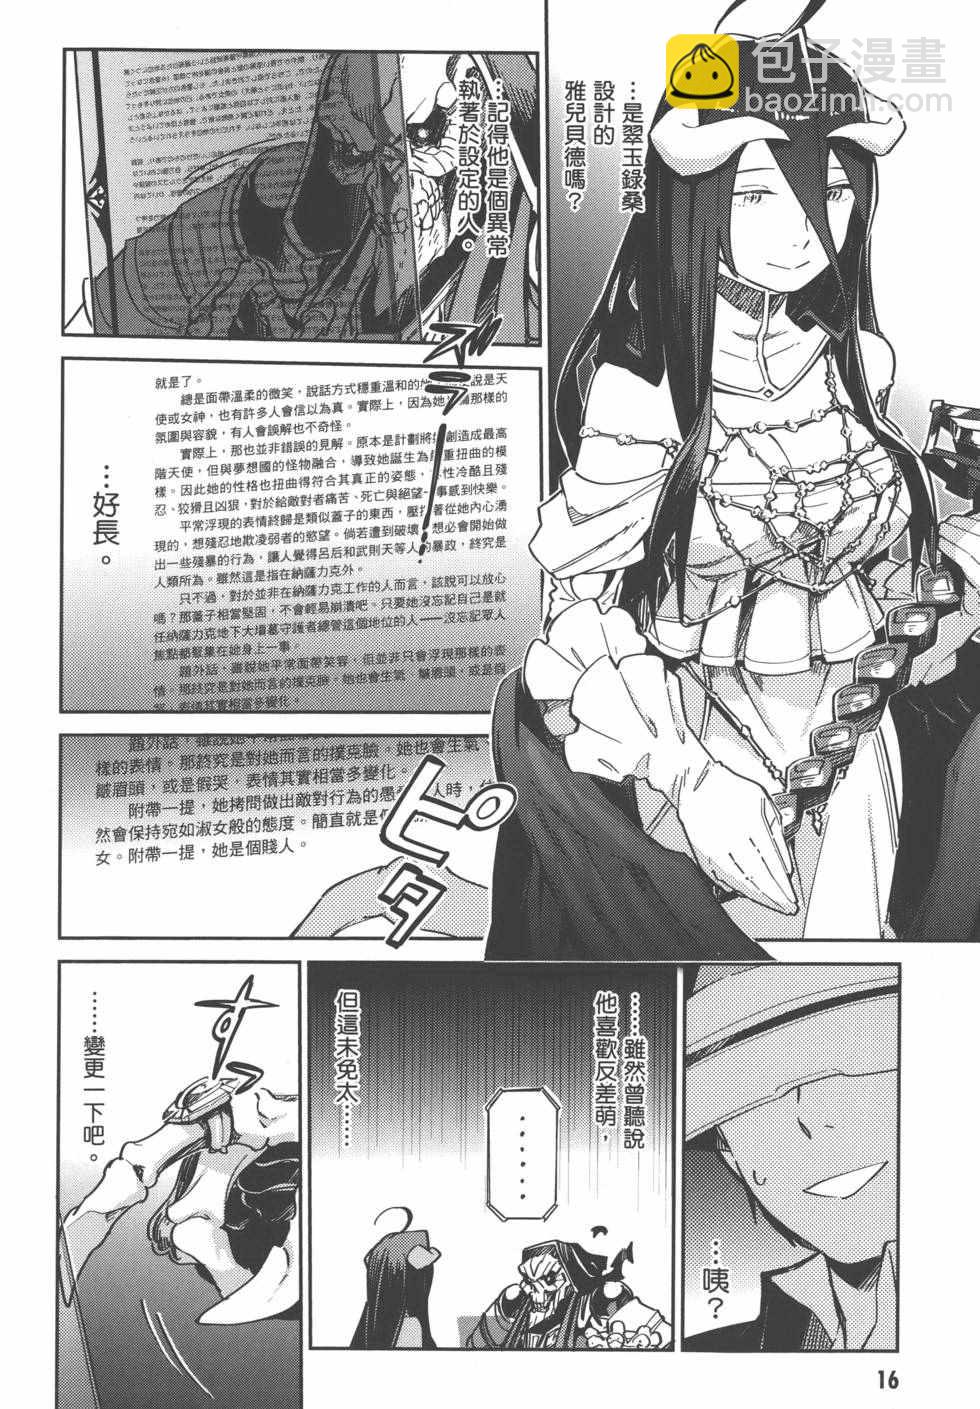 OVERLORD - 第1卷(1/4) - 2